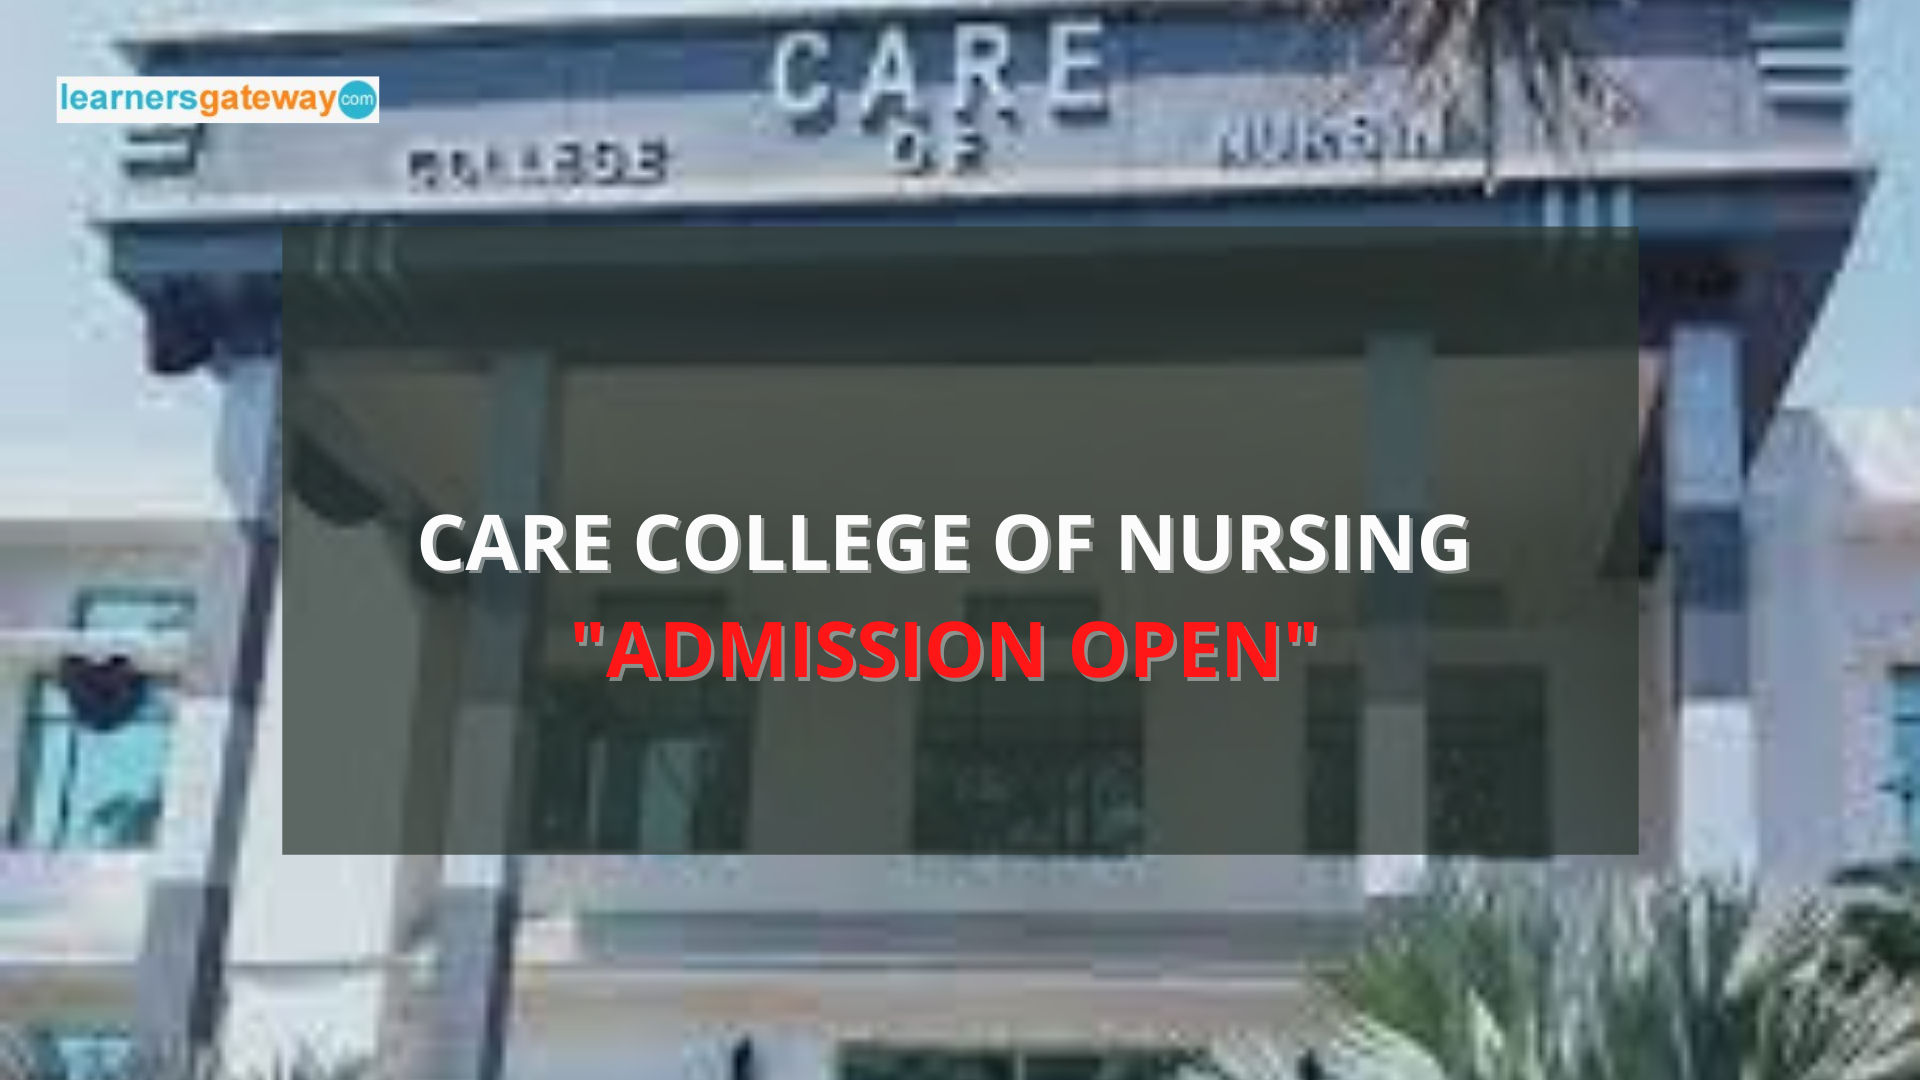 Care College of Nursing Admission & Fee Structure